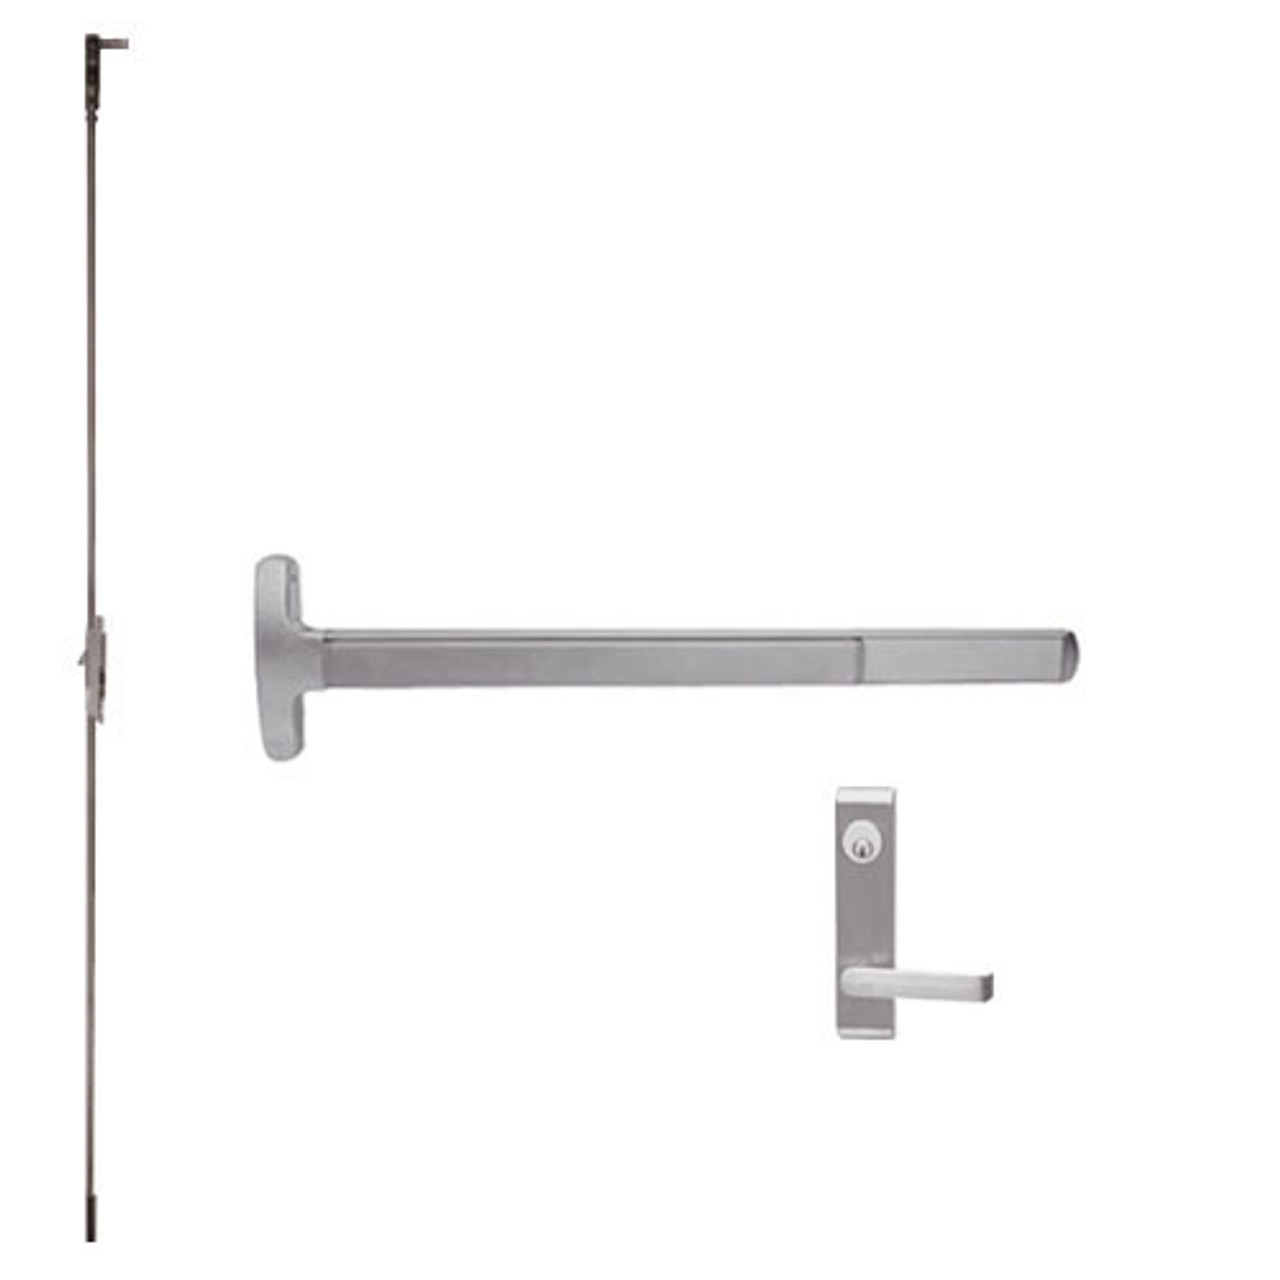 F-24-C-L-DANE-US32D-3-LHR Falcon Exit Device in Satin Stainless Steel